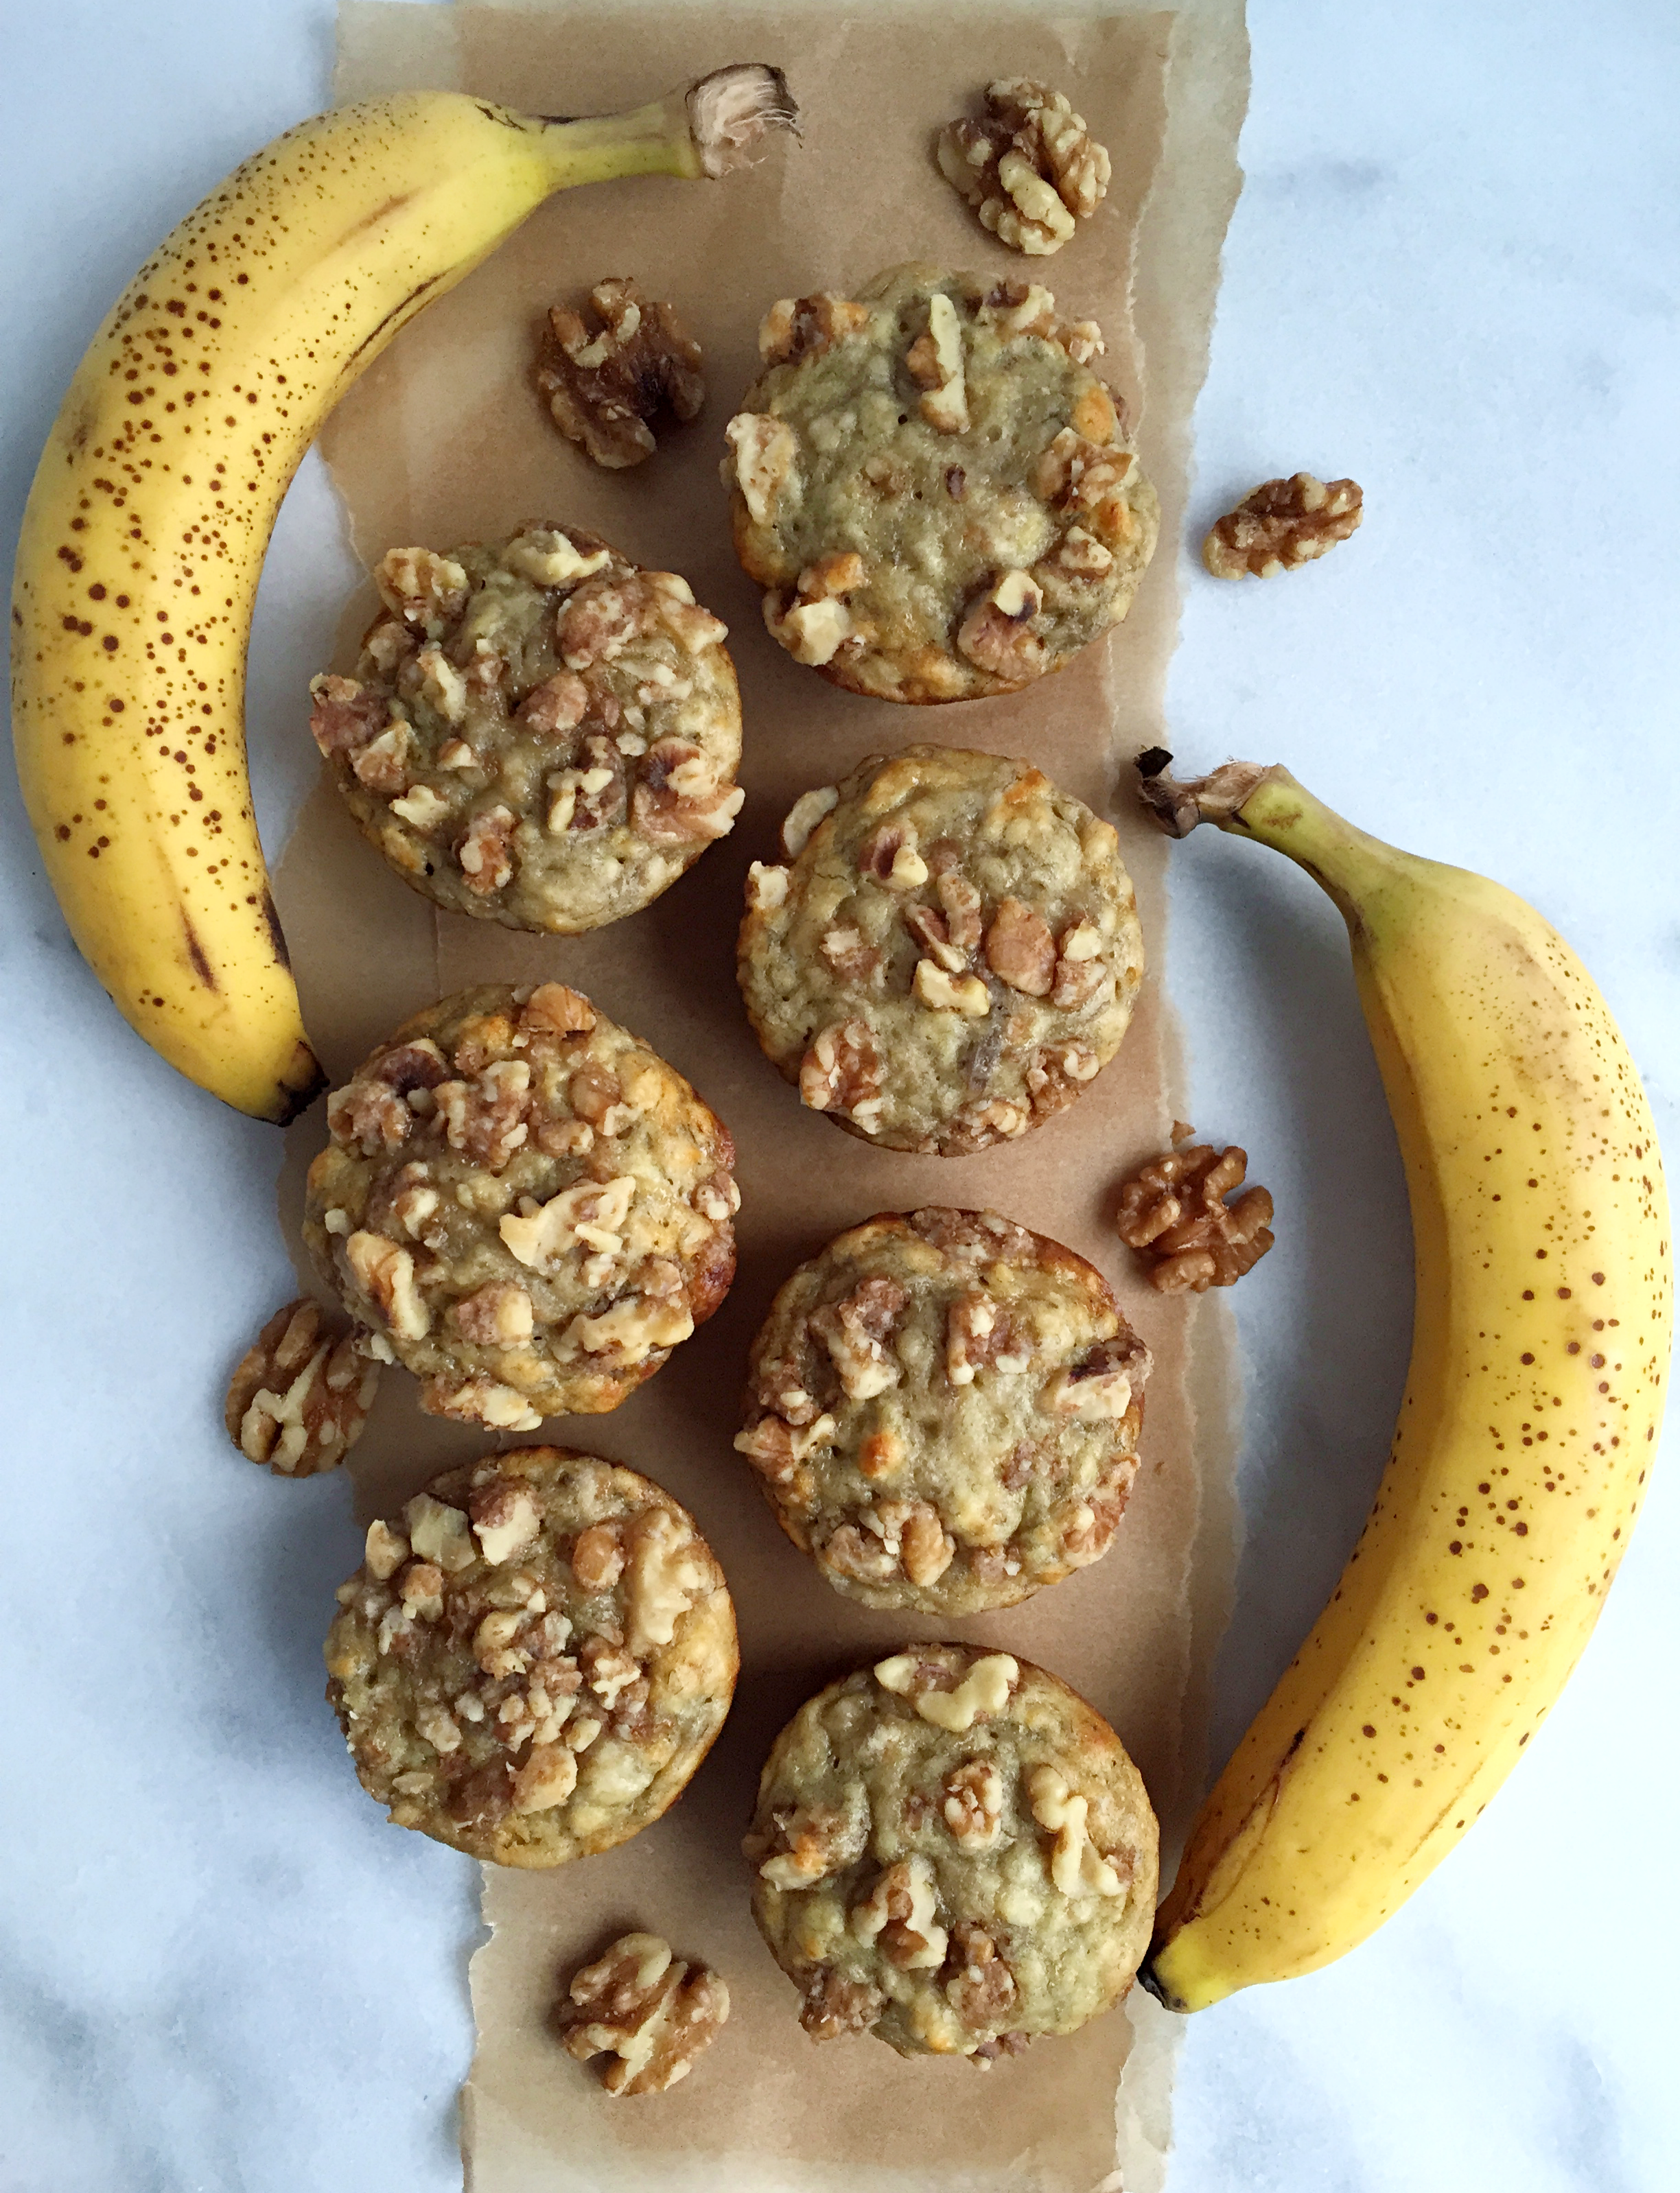 INCREDIBLE Banana Bread Walnut Crunch Muffins! Super moist with the perfect crunch topping and completely dairy free! #dairyfree #recipe | Peach and the Cobbler